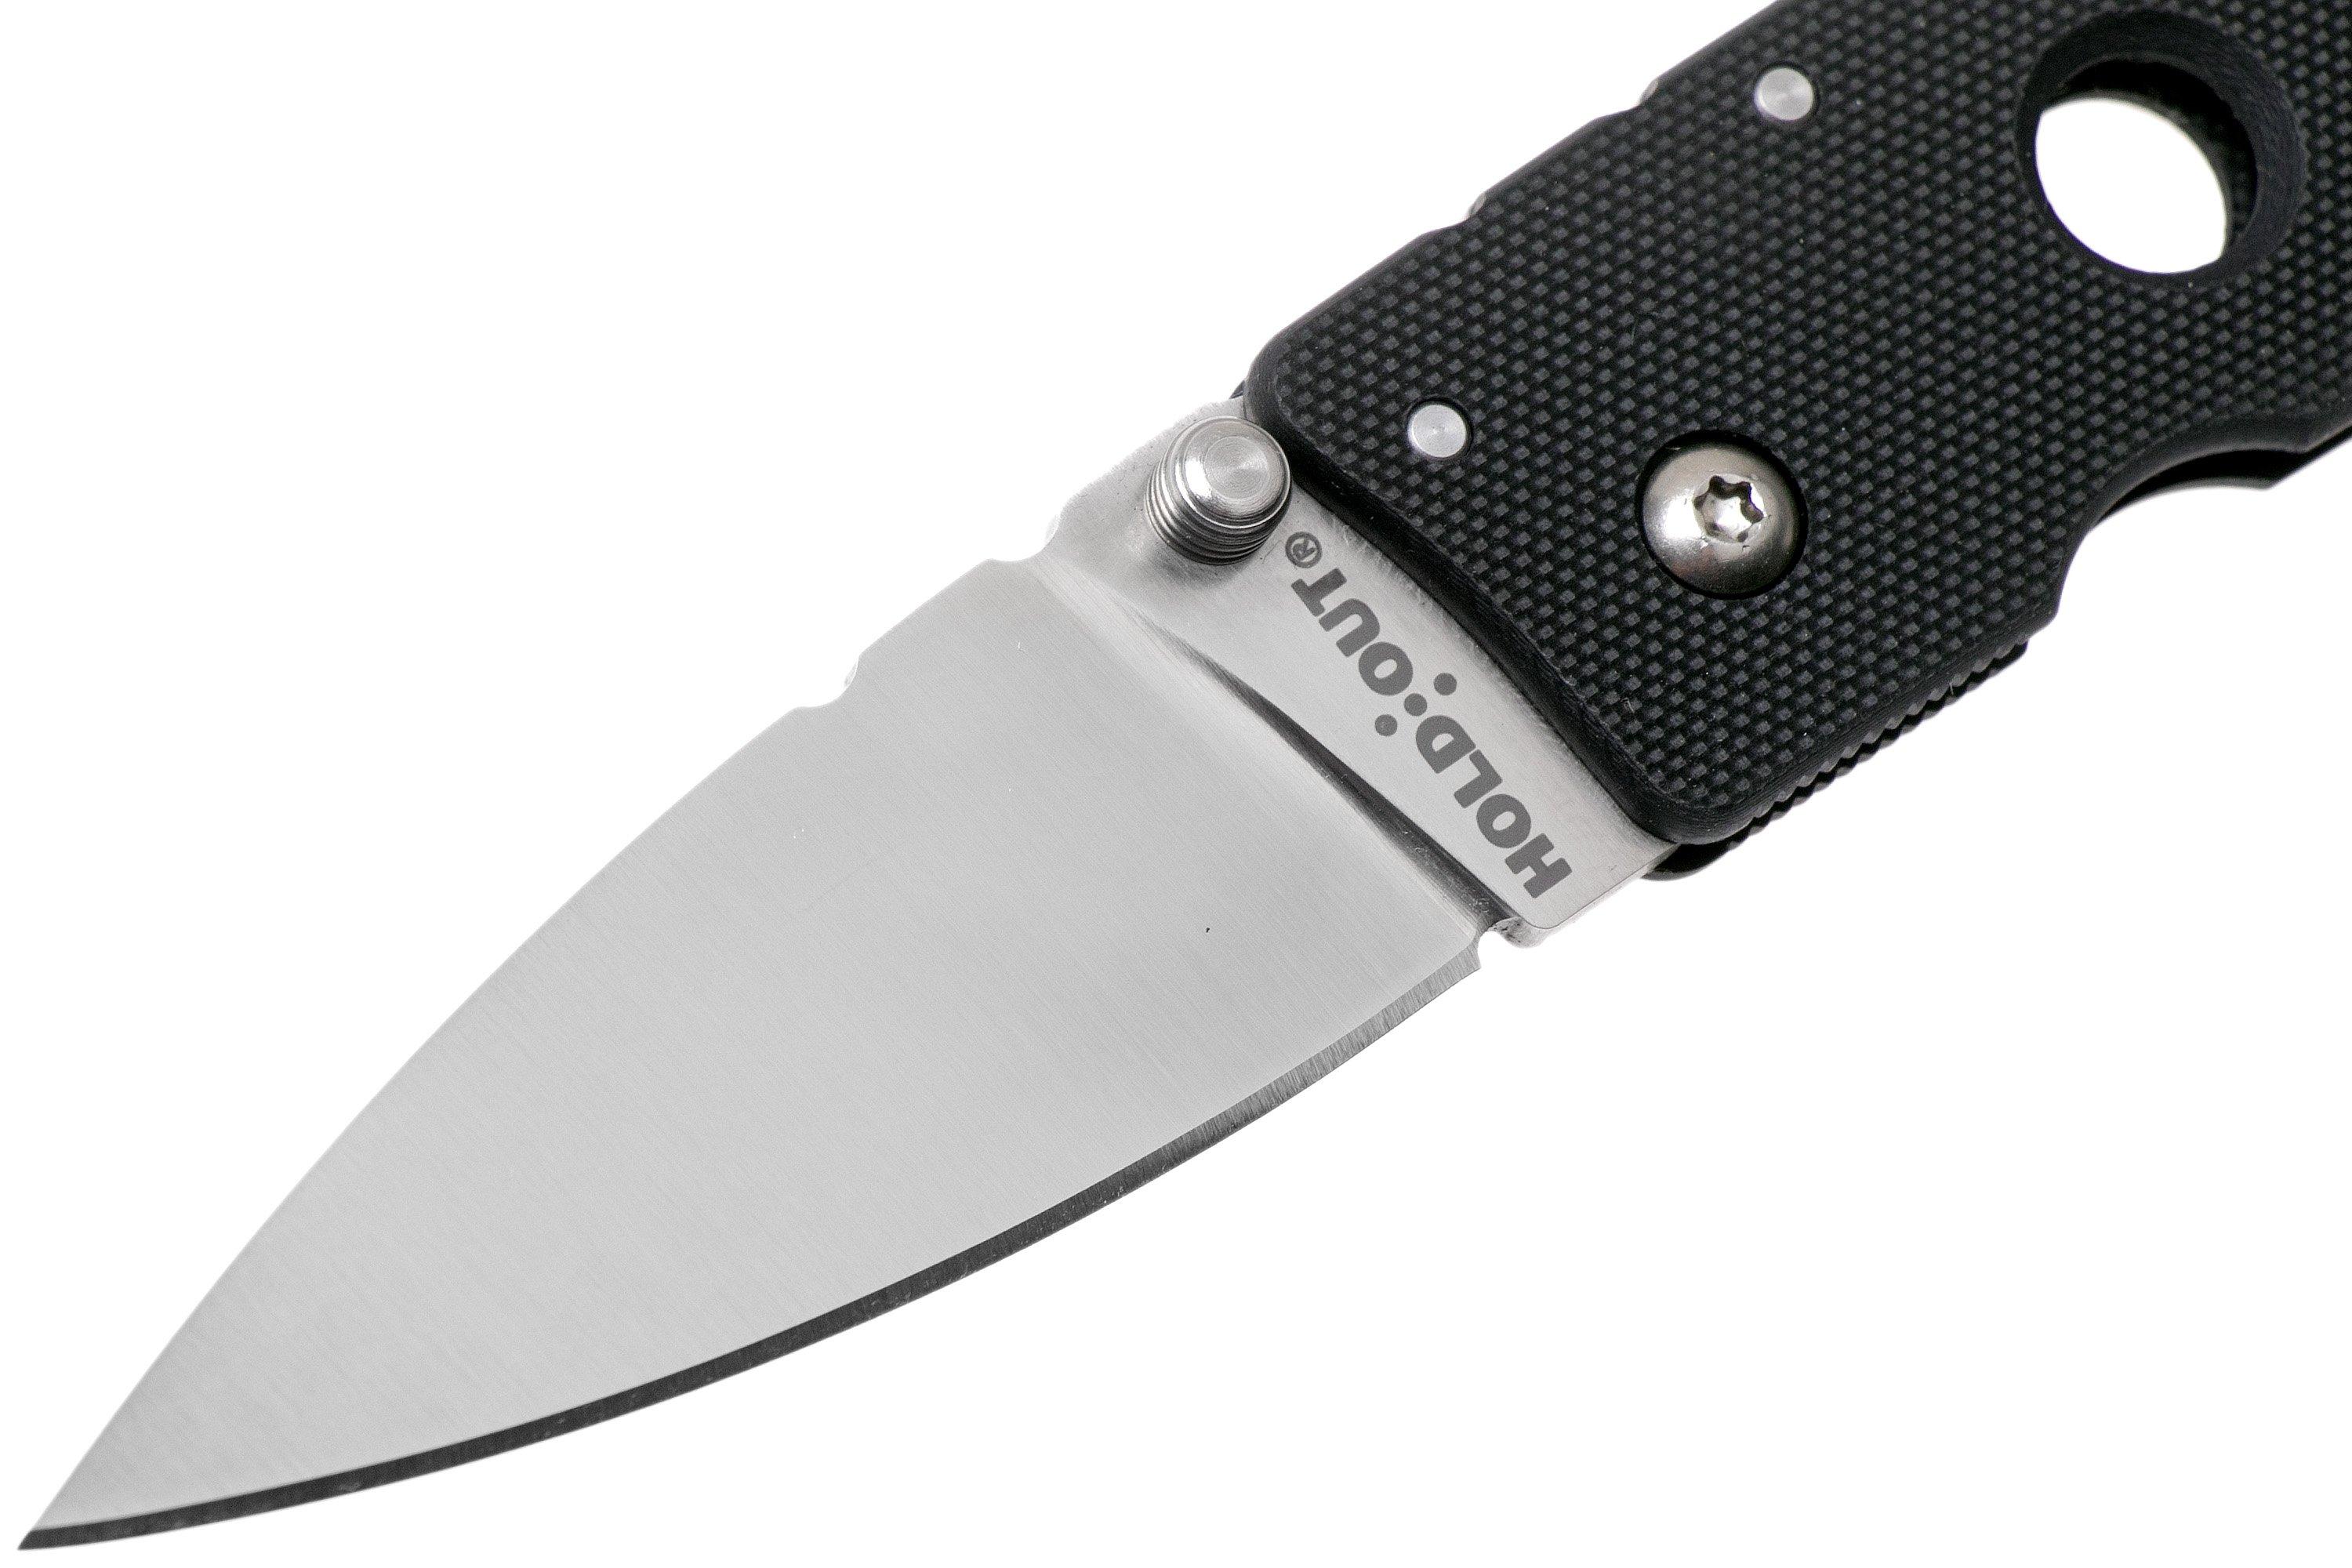 cold-steel-hold-out-3-11g3-cpm-s35vn-pocket-knife-advantageously-shopping-at-knivesandtools-co-uk